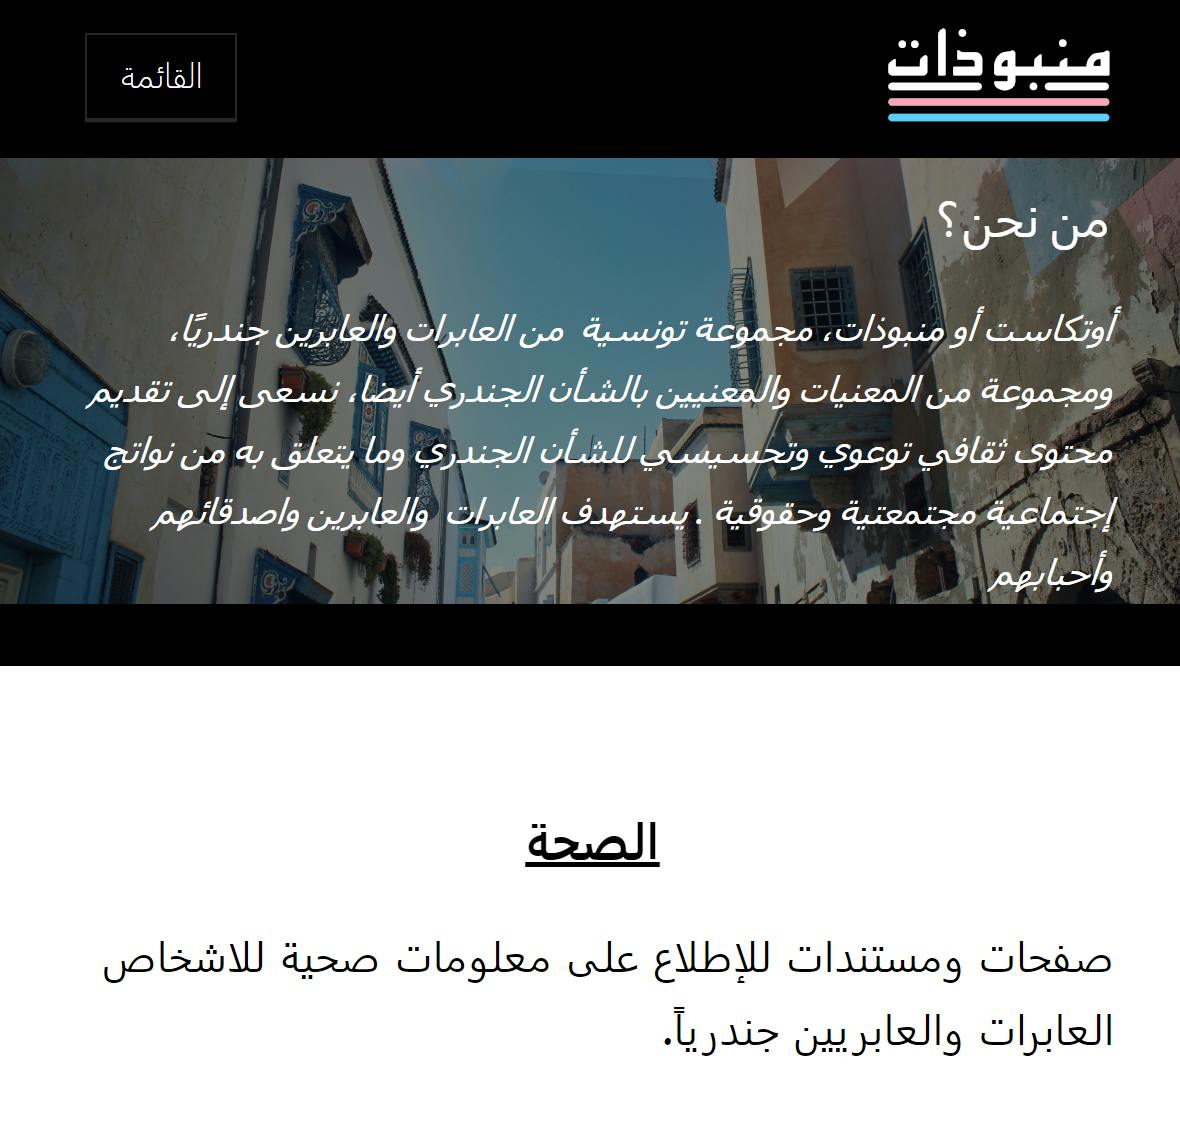 Screen grab of the Outcasts Tunisia website.